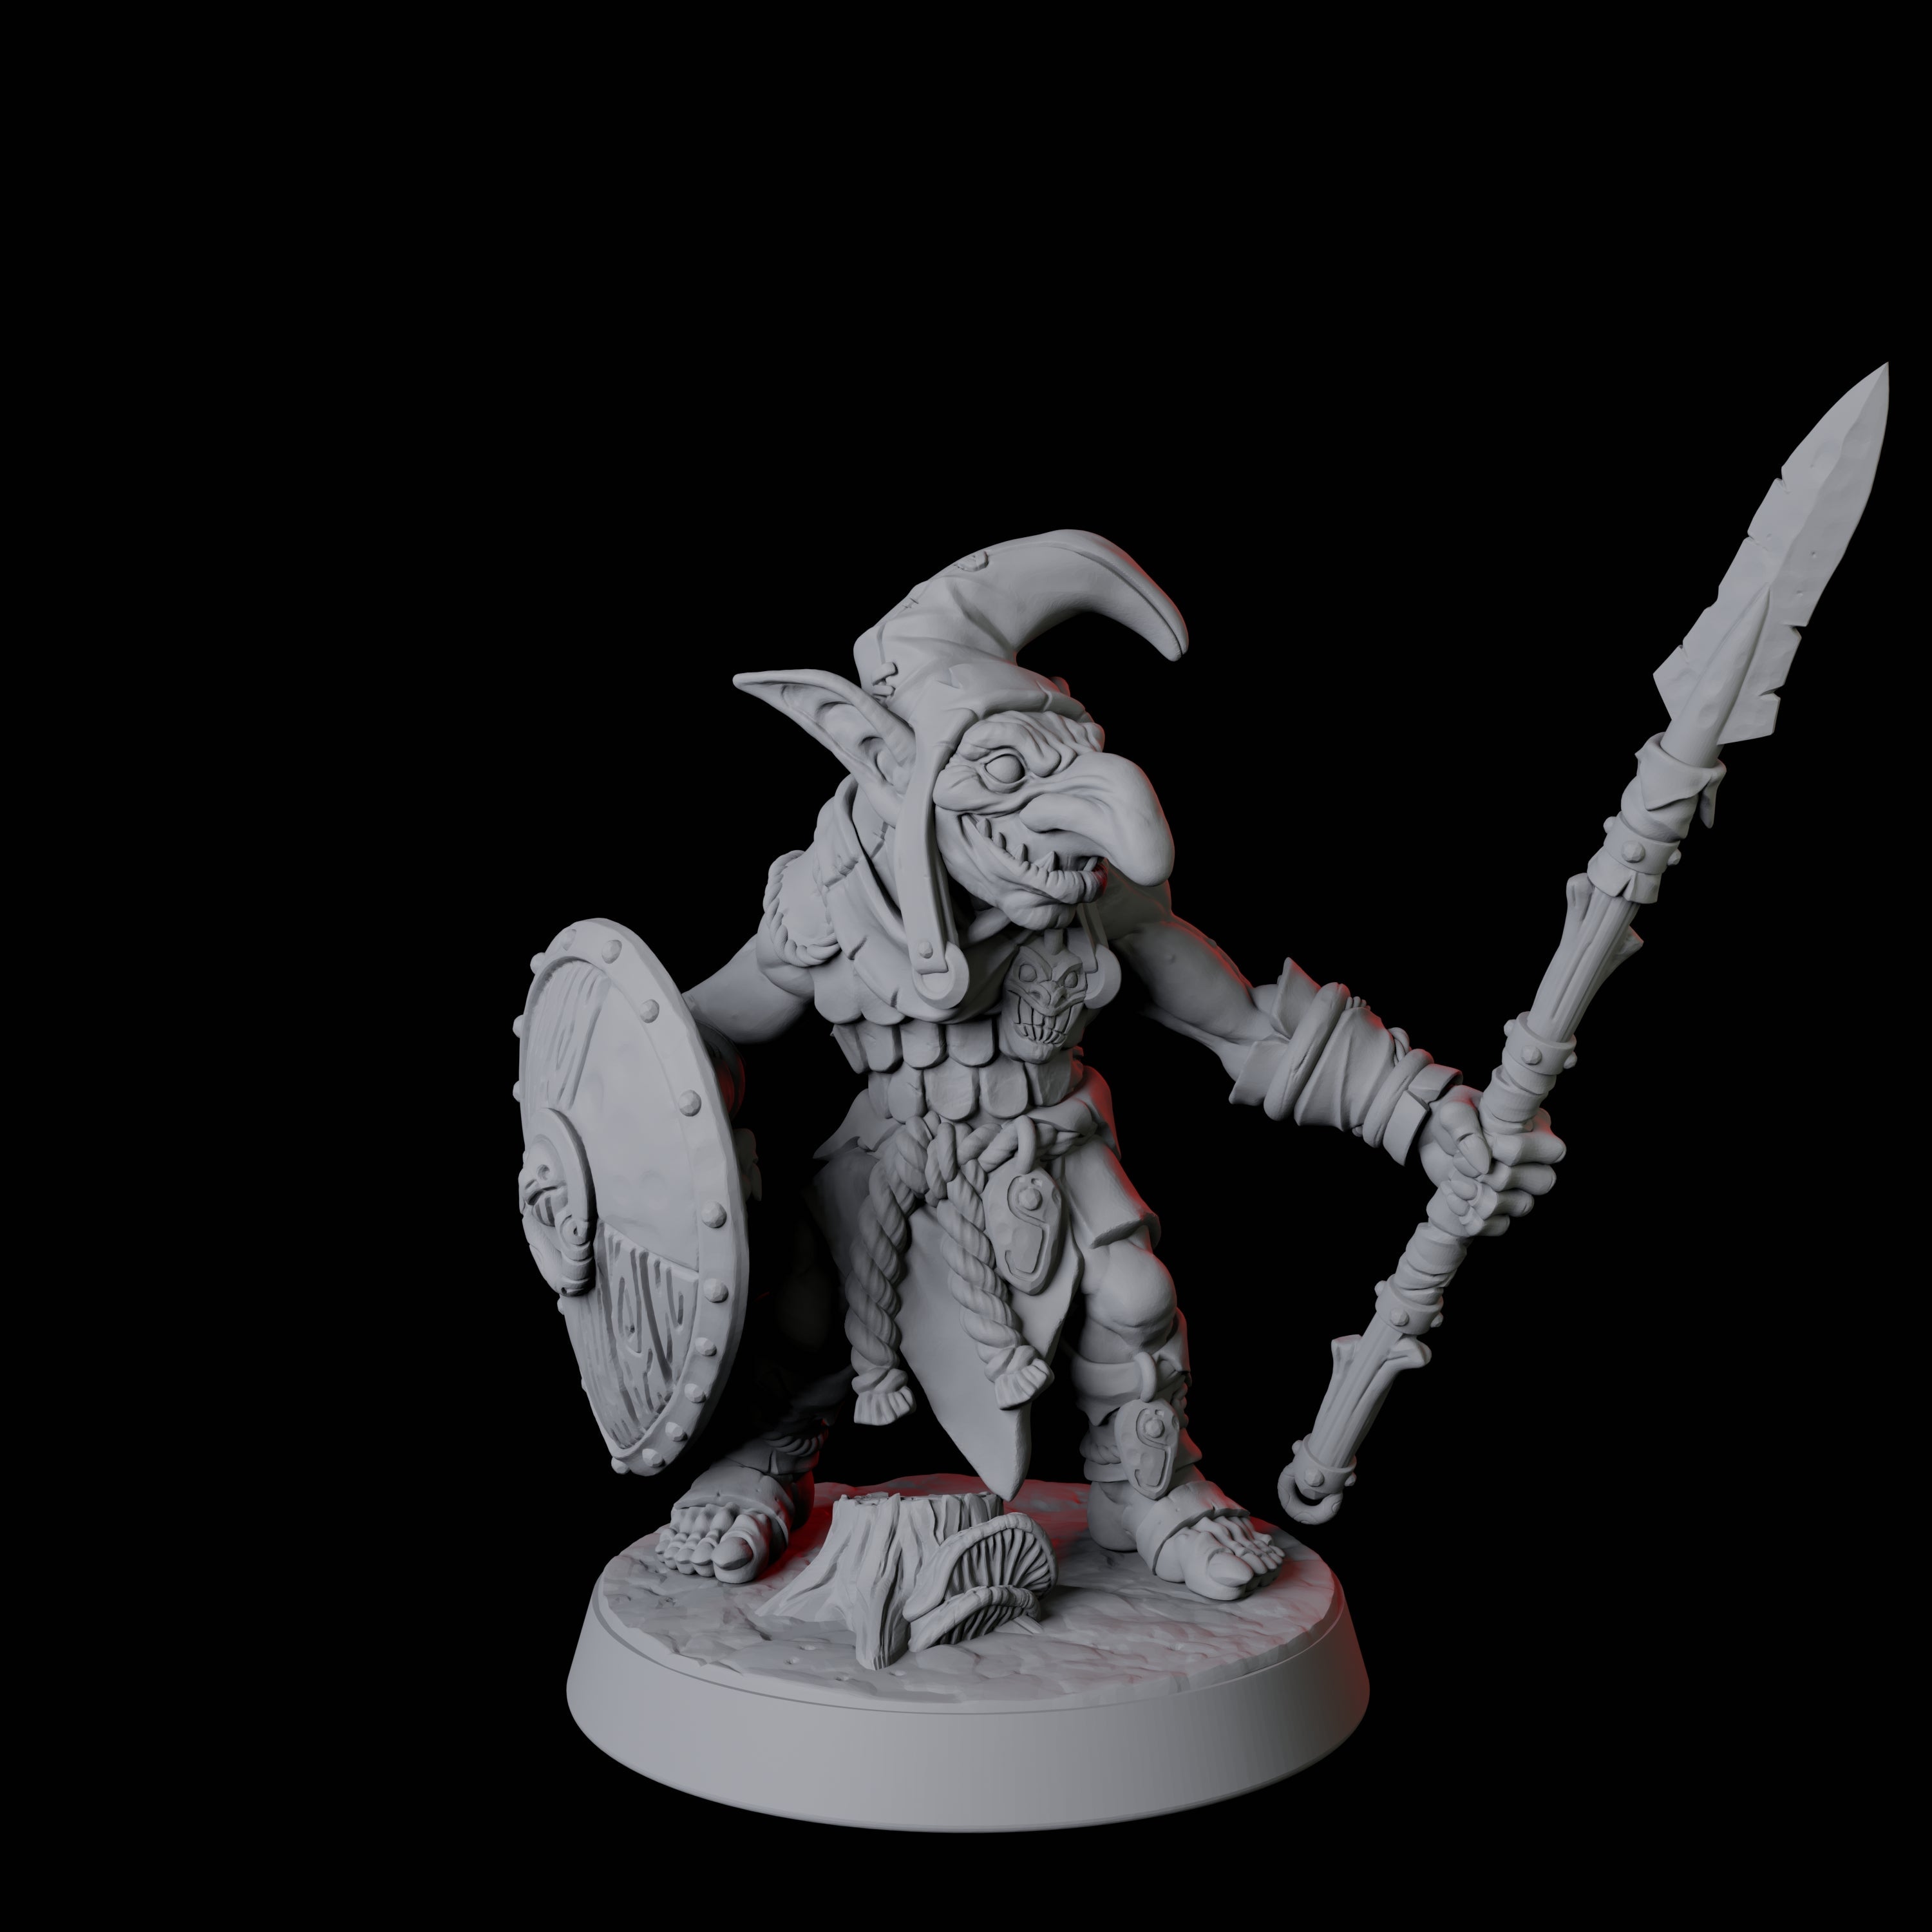 Six Snivelling Goblins Miniature for Dungeons and Dragons, Pathfinder or other TTRPGs